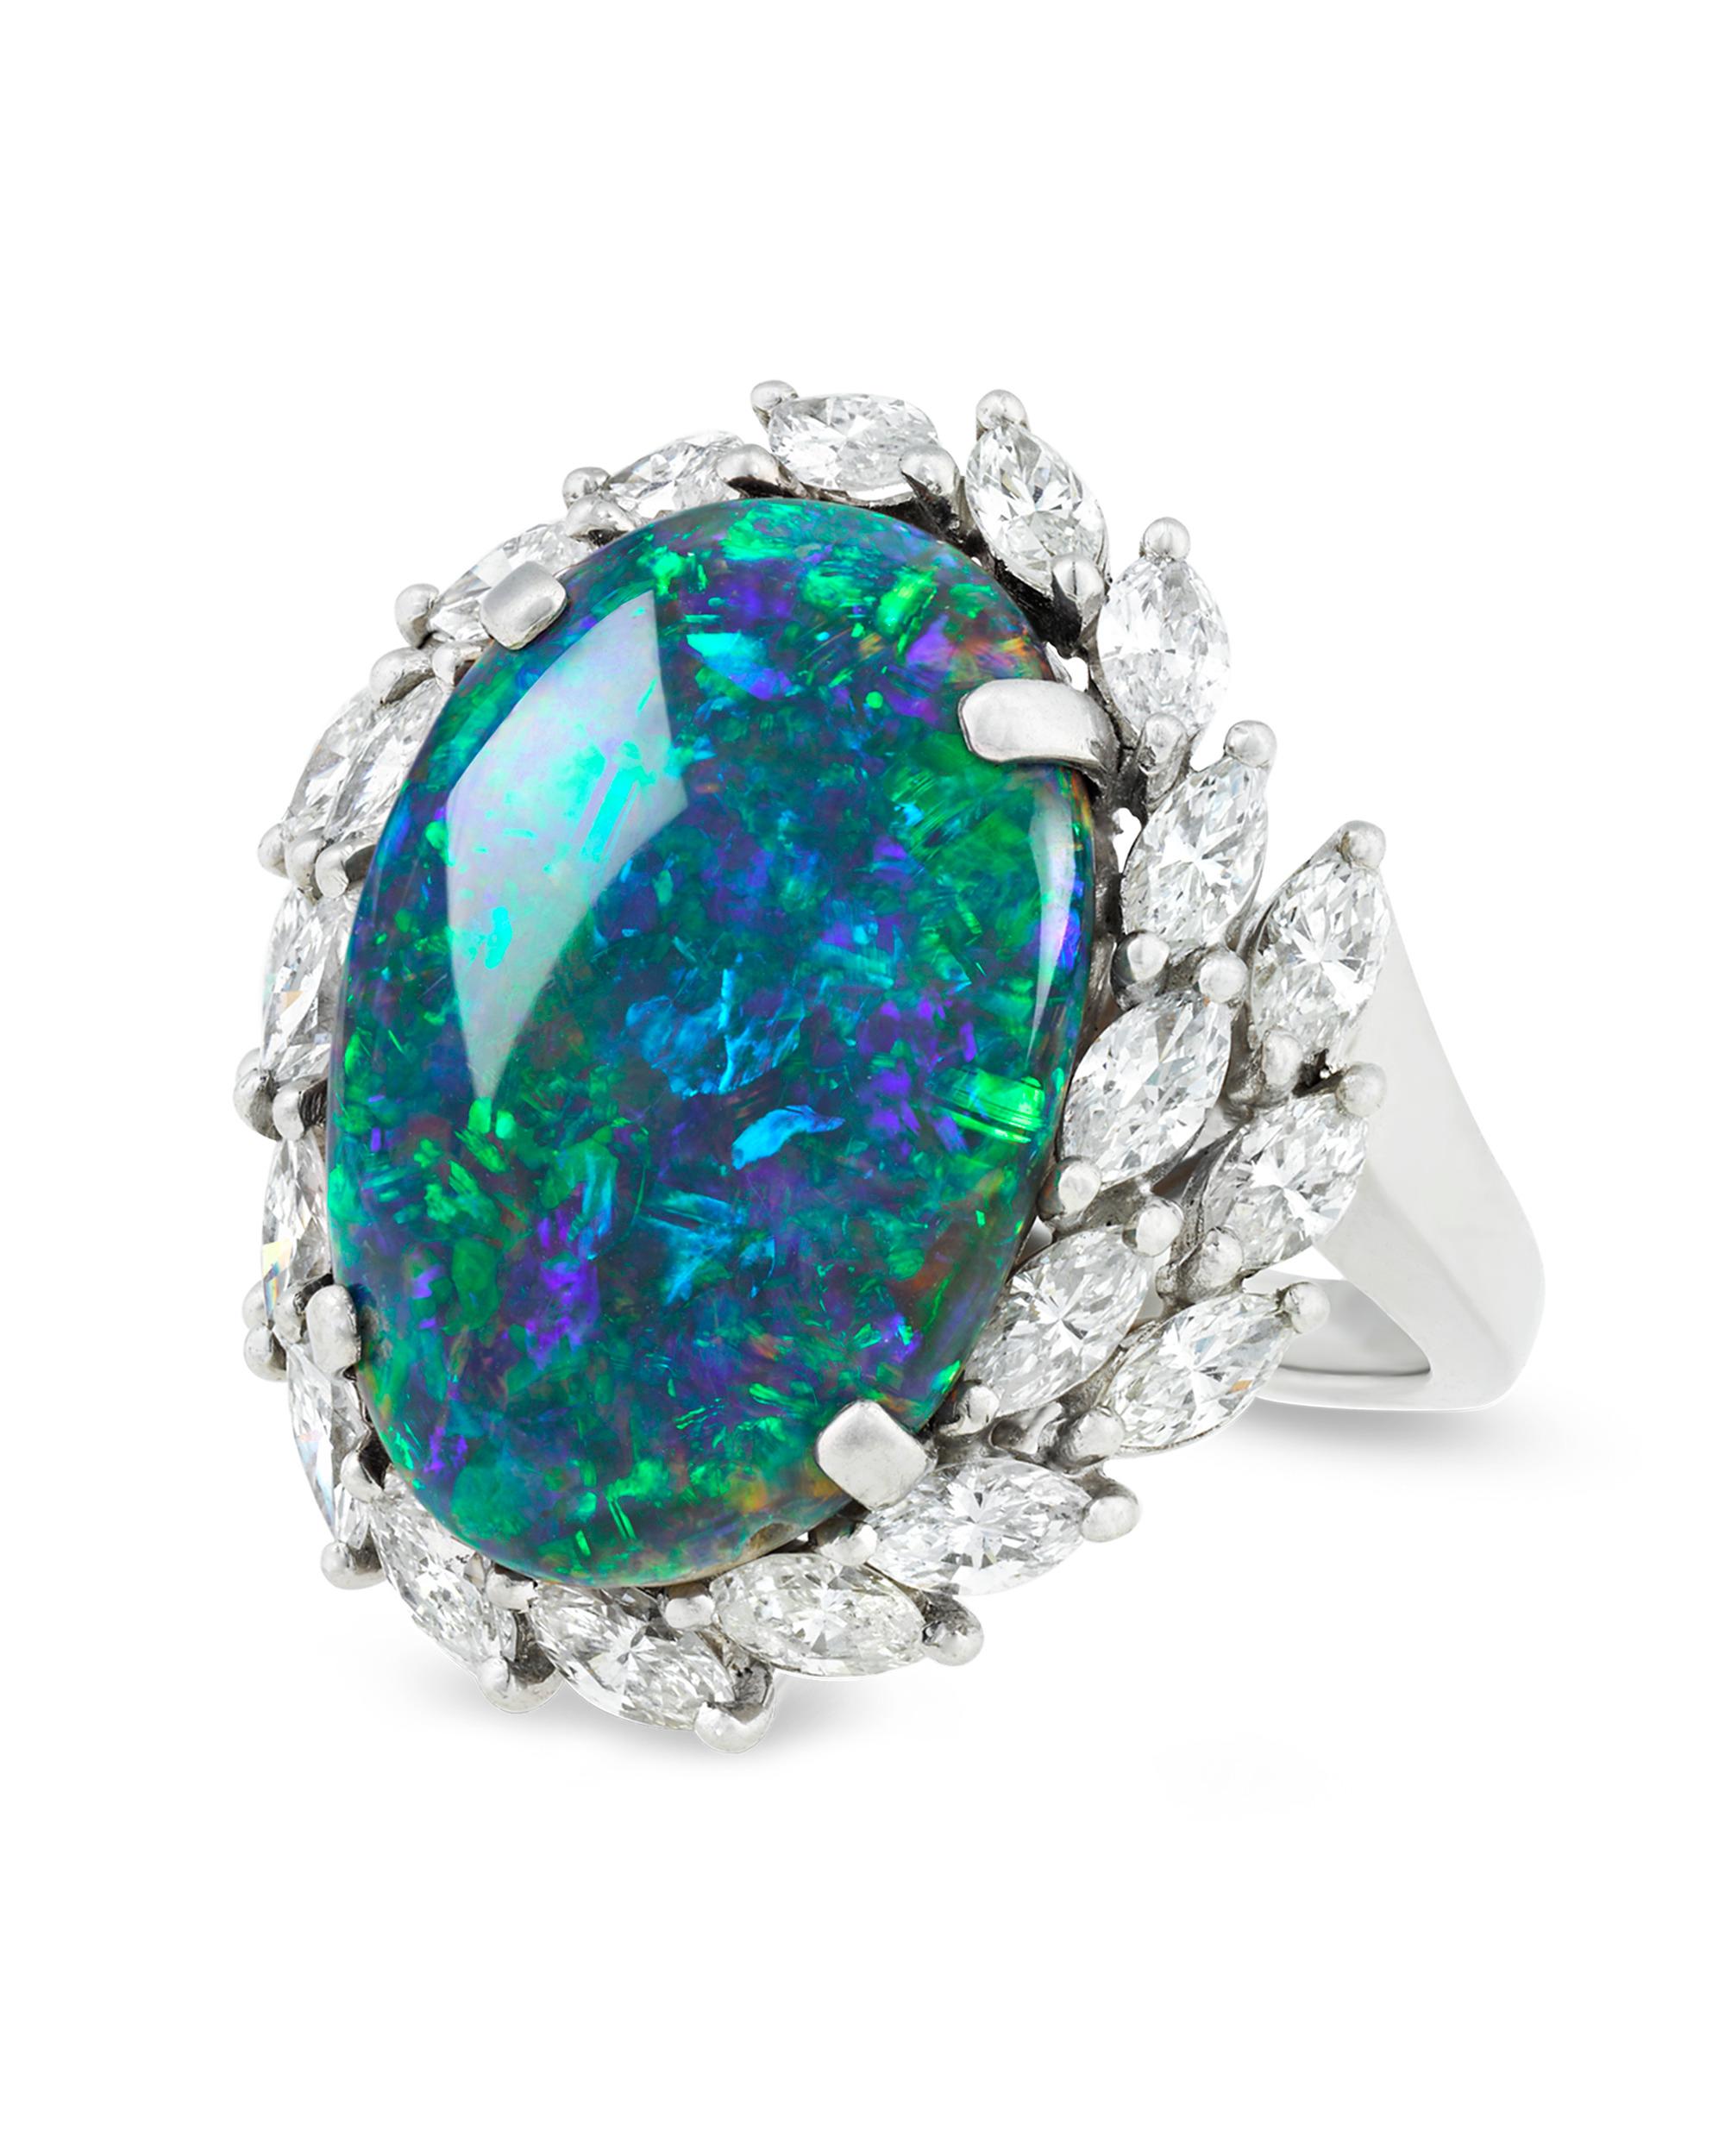 Crowned by a laurel motif of white diamonds, this ravishing black opal is set apart by its dynamic beauty and exceptional color. Weighing 8.28 carats, this stunning gem exhibits fiery reds and oranges harmonizing with cool purples, blues and greens,